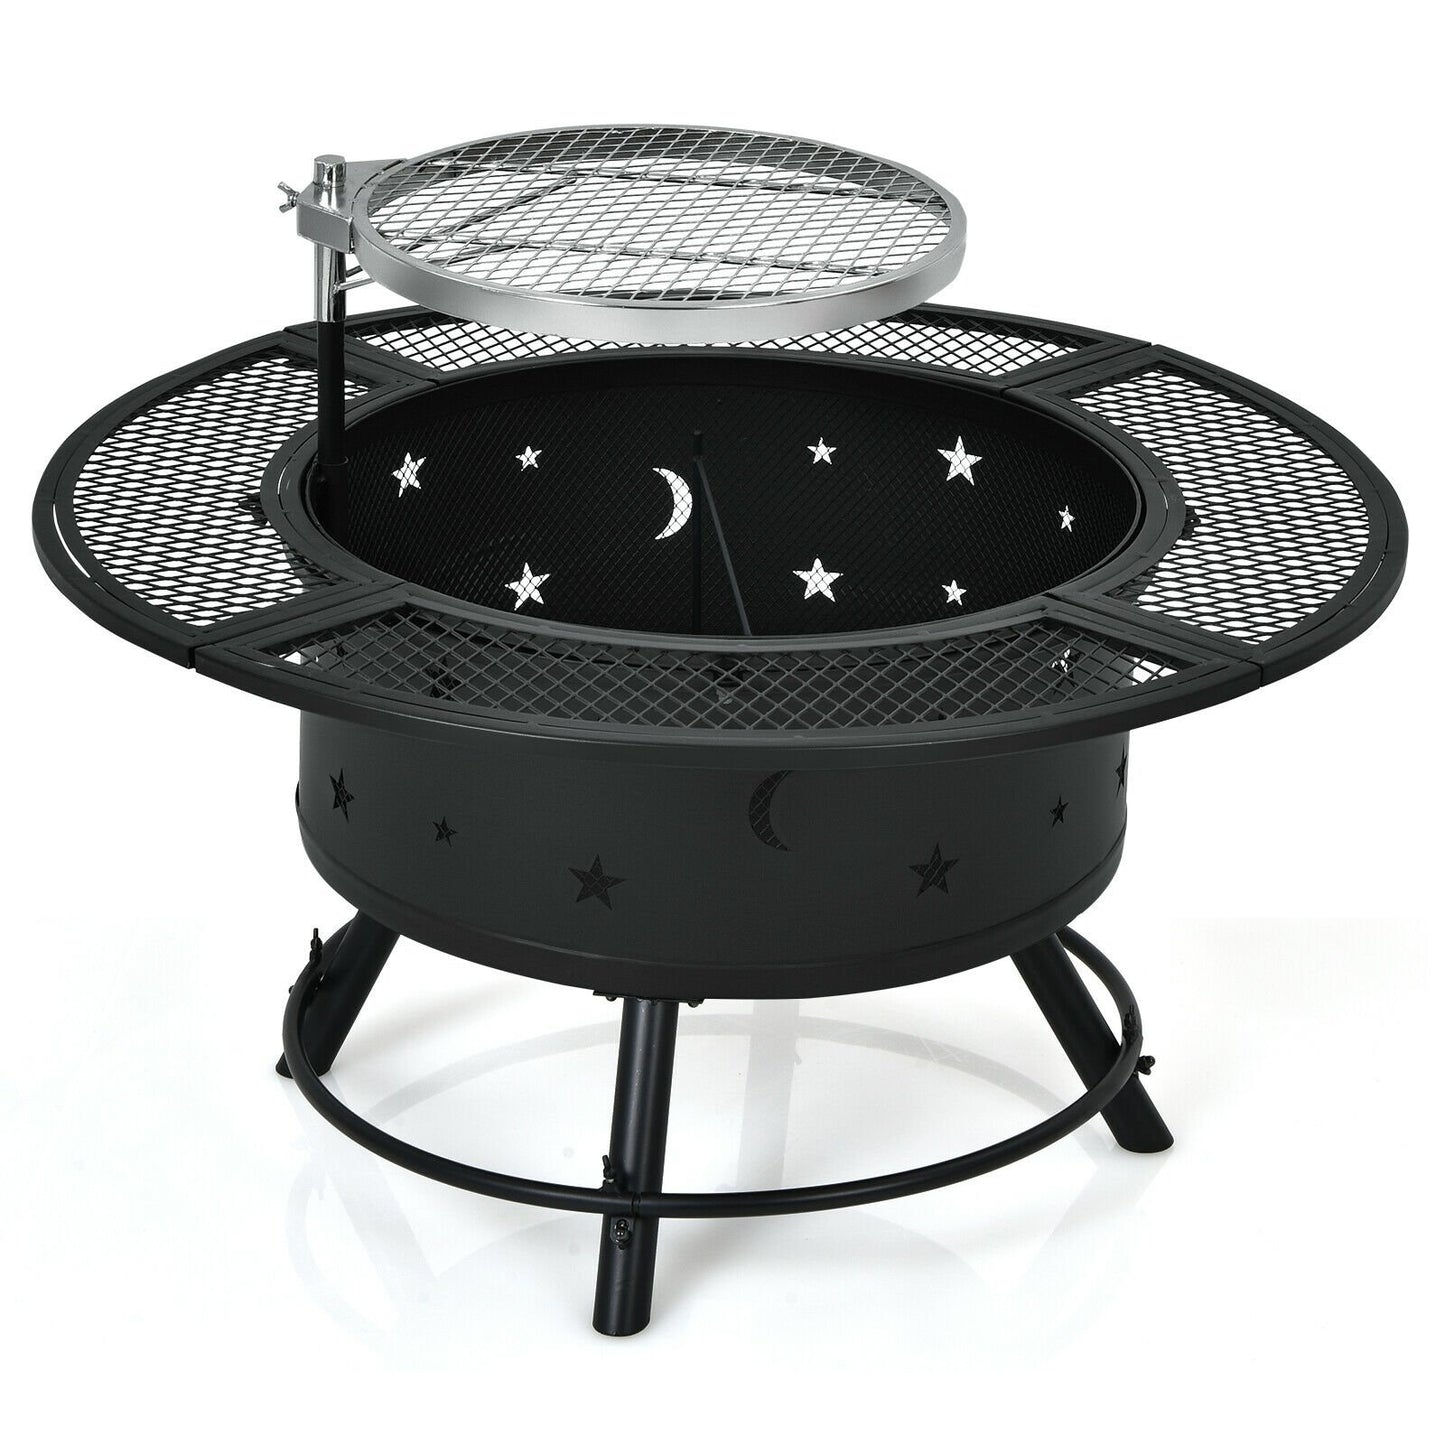 32-Inch Outdoor Wood Burning Fire Pit with 360°Swivel BBQ Grate, Beige - Gallery Canada